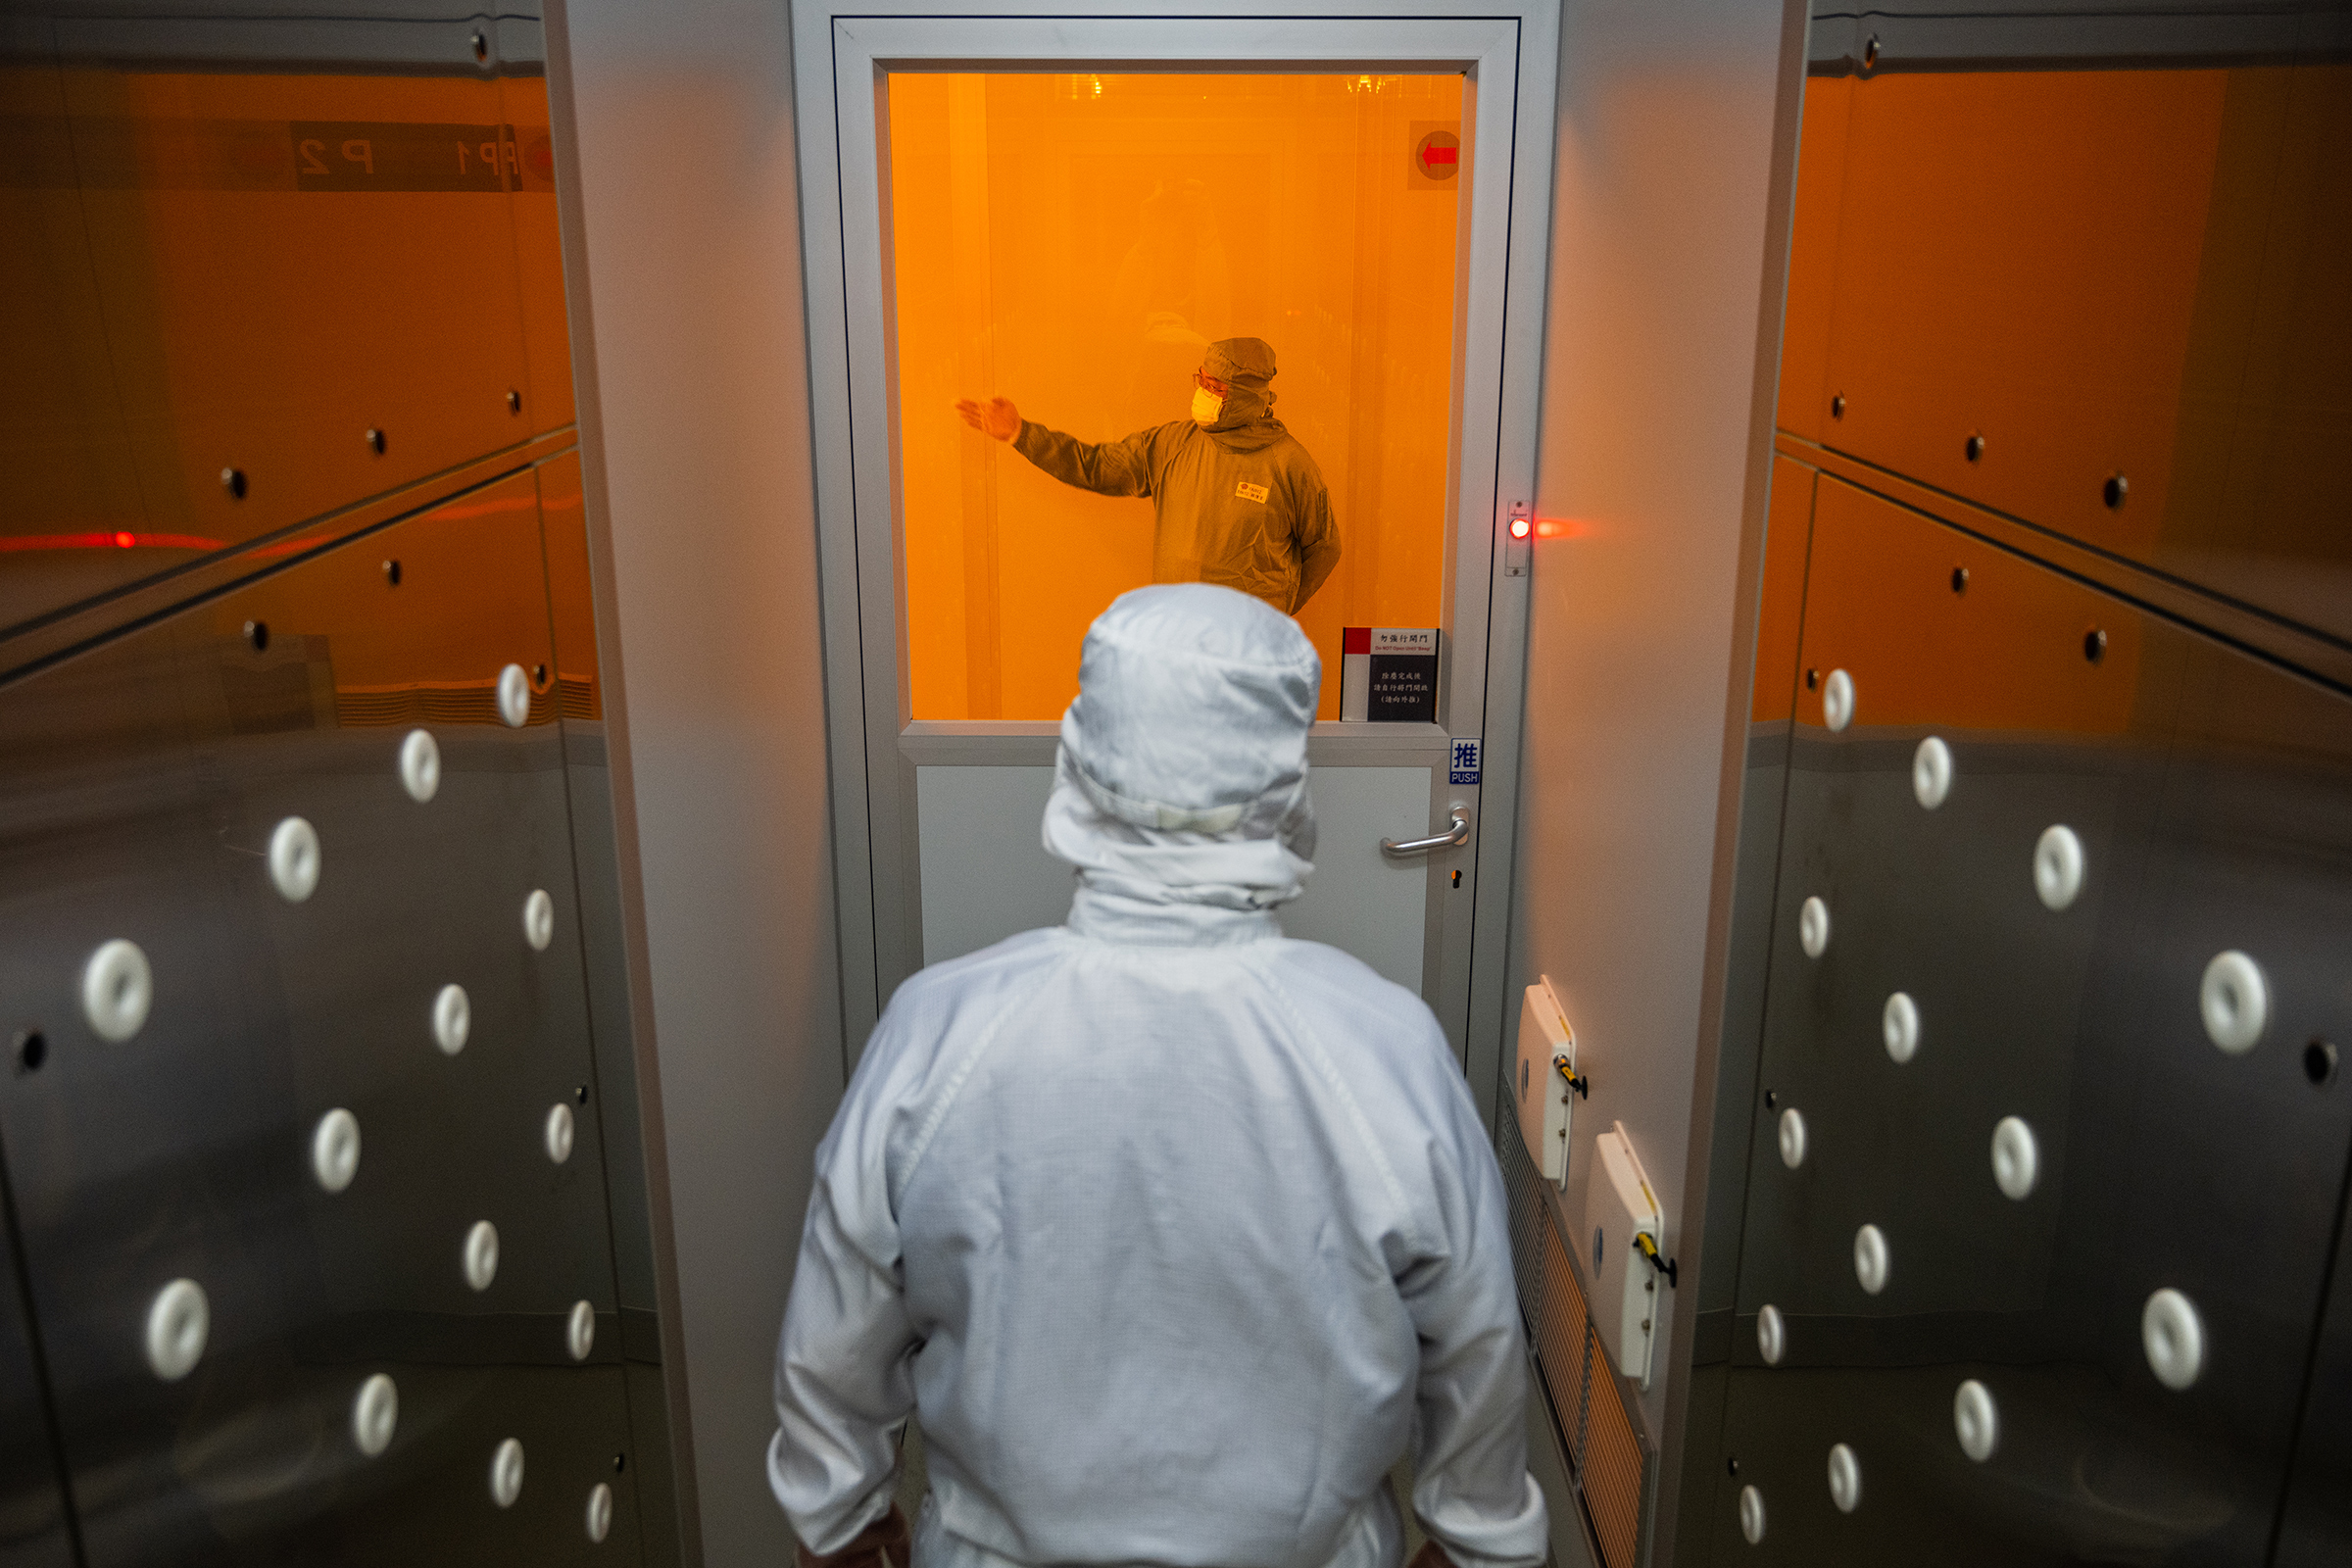 A worker enters a “clean room” at chipmaker TSMC’s headquarters in Hsinchu, Taiwan, on Sept. 10